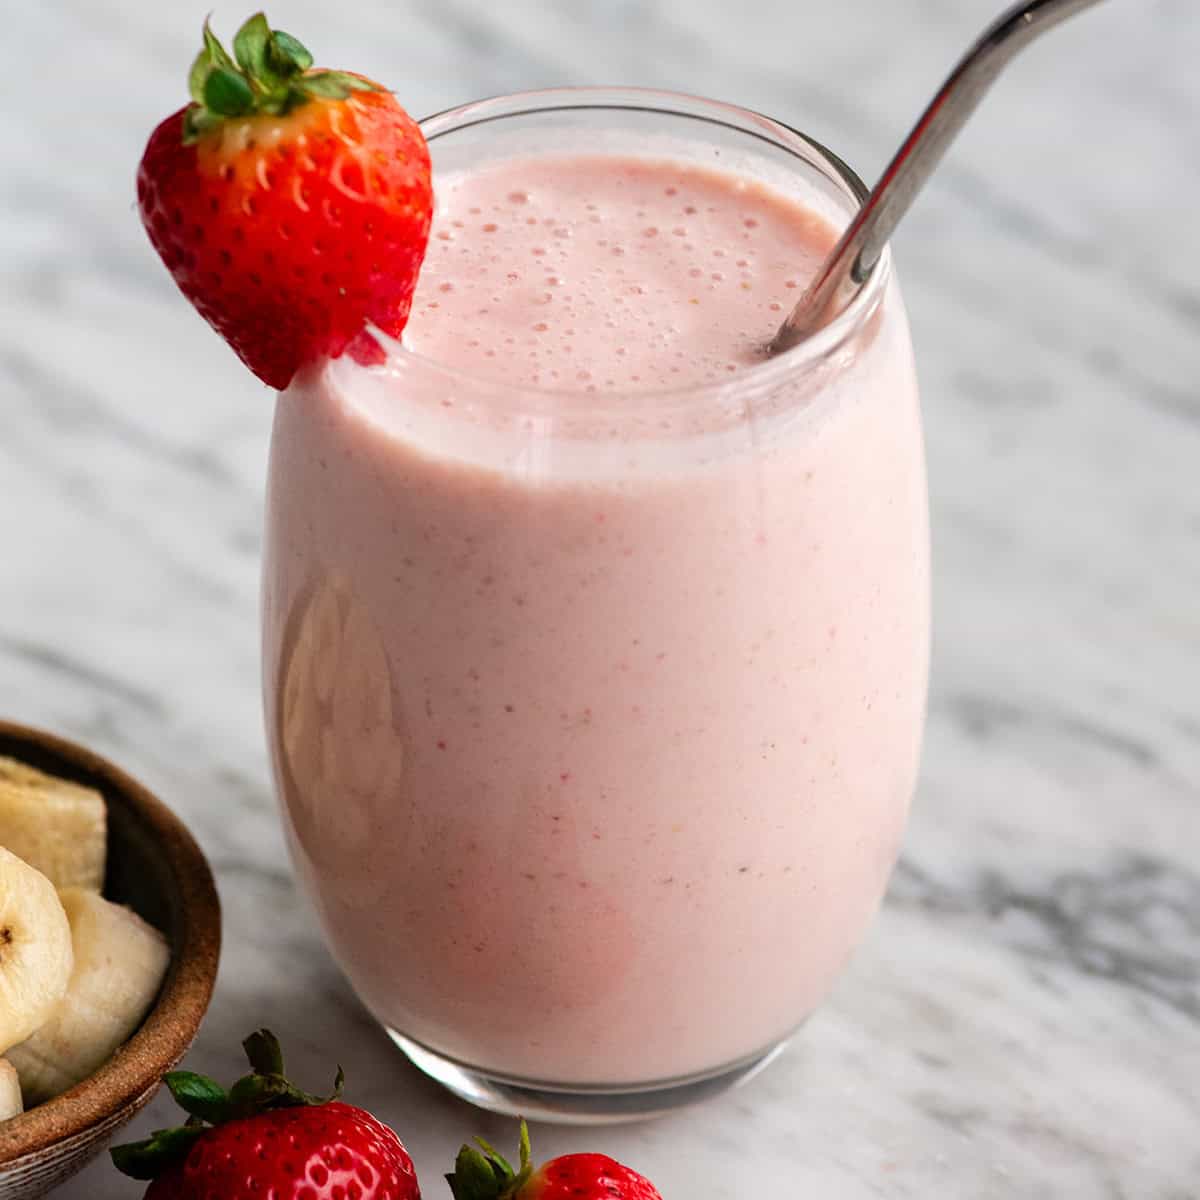 a glass of strawberry banana smoothie with straw